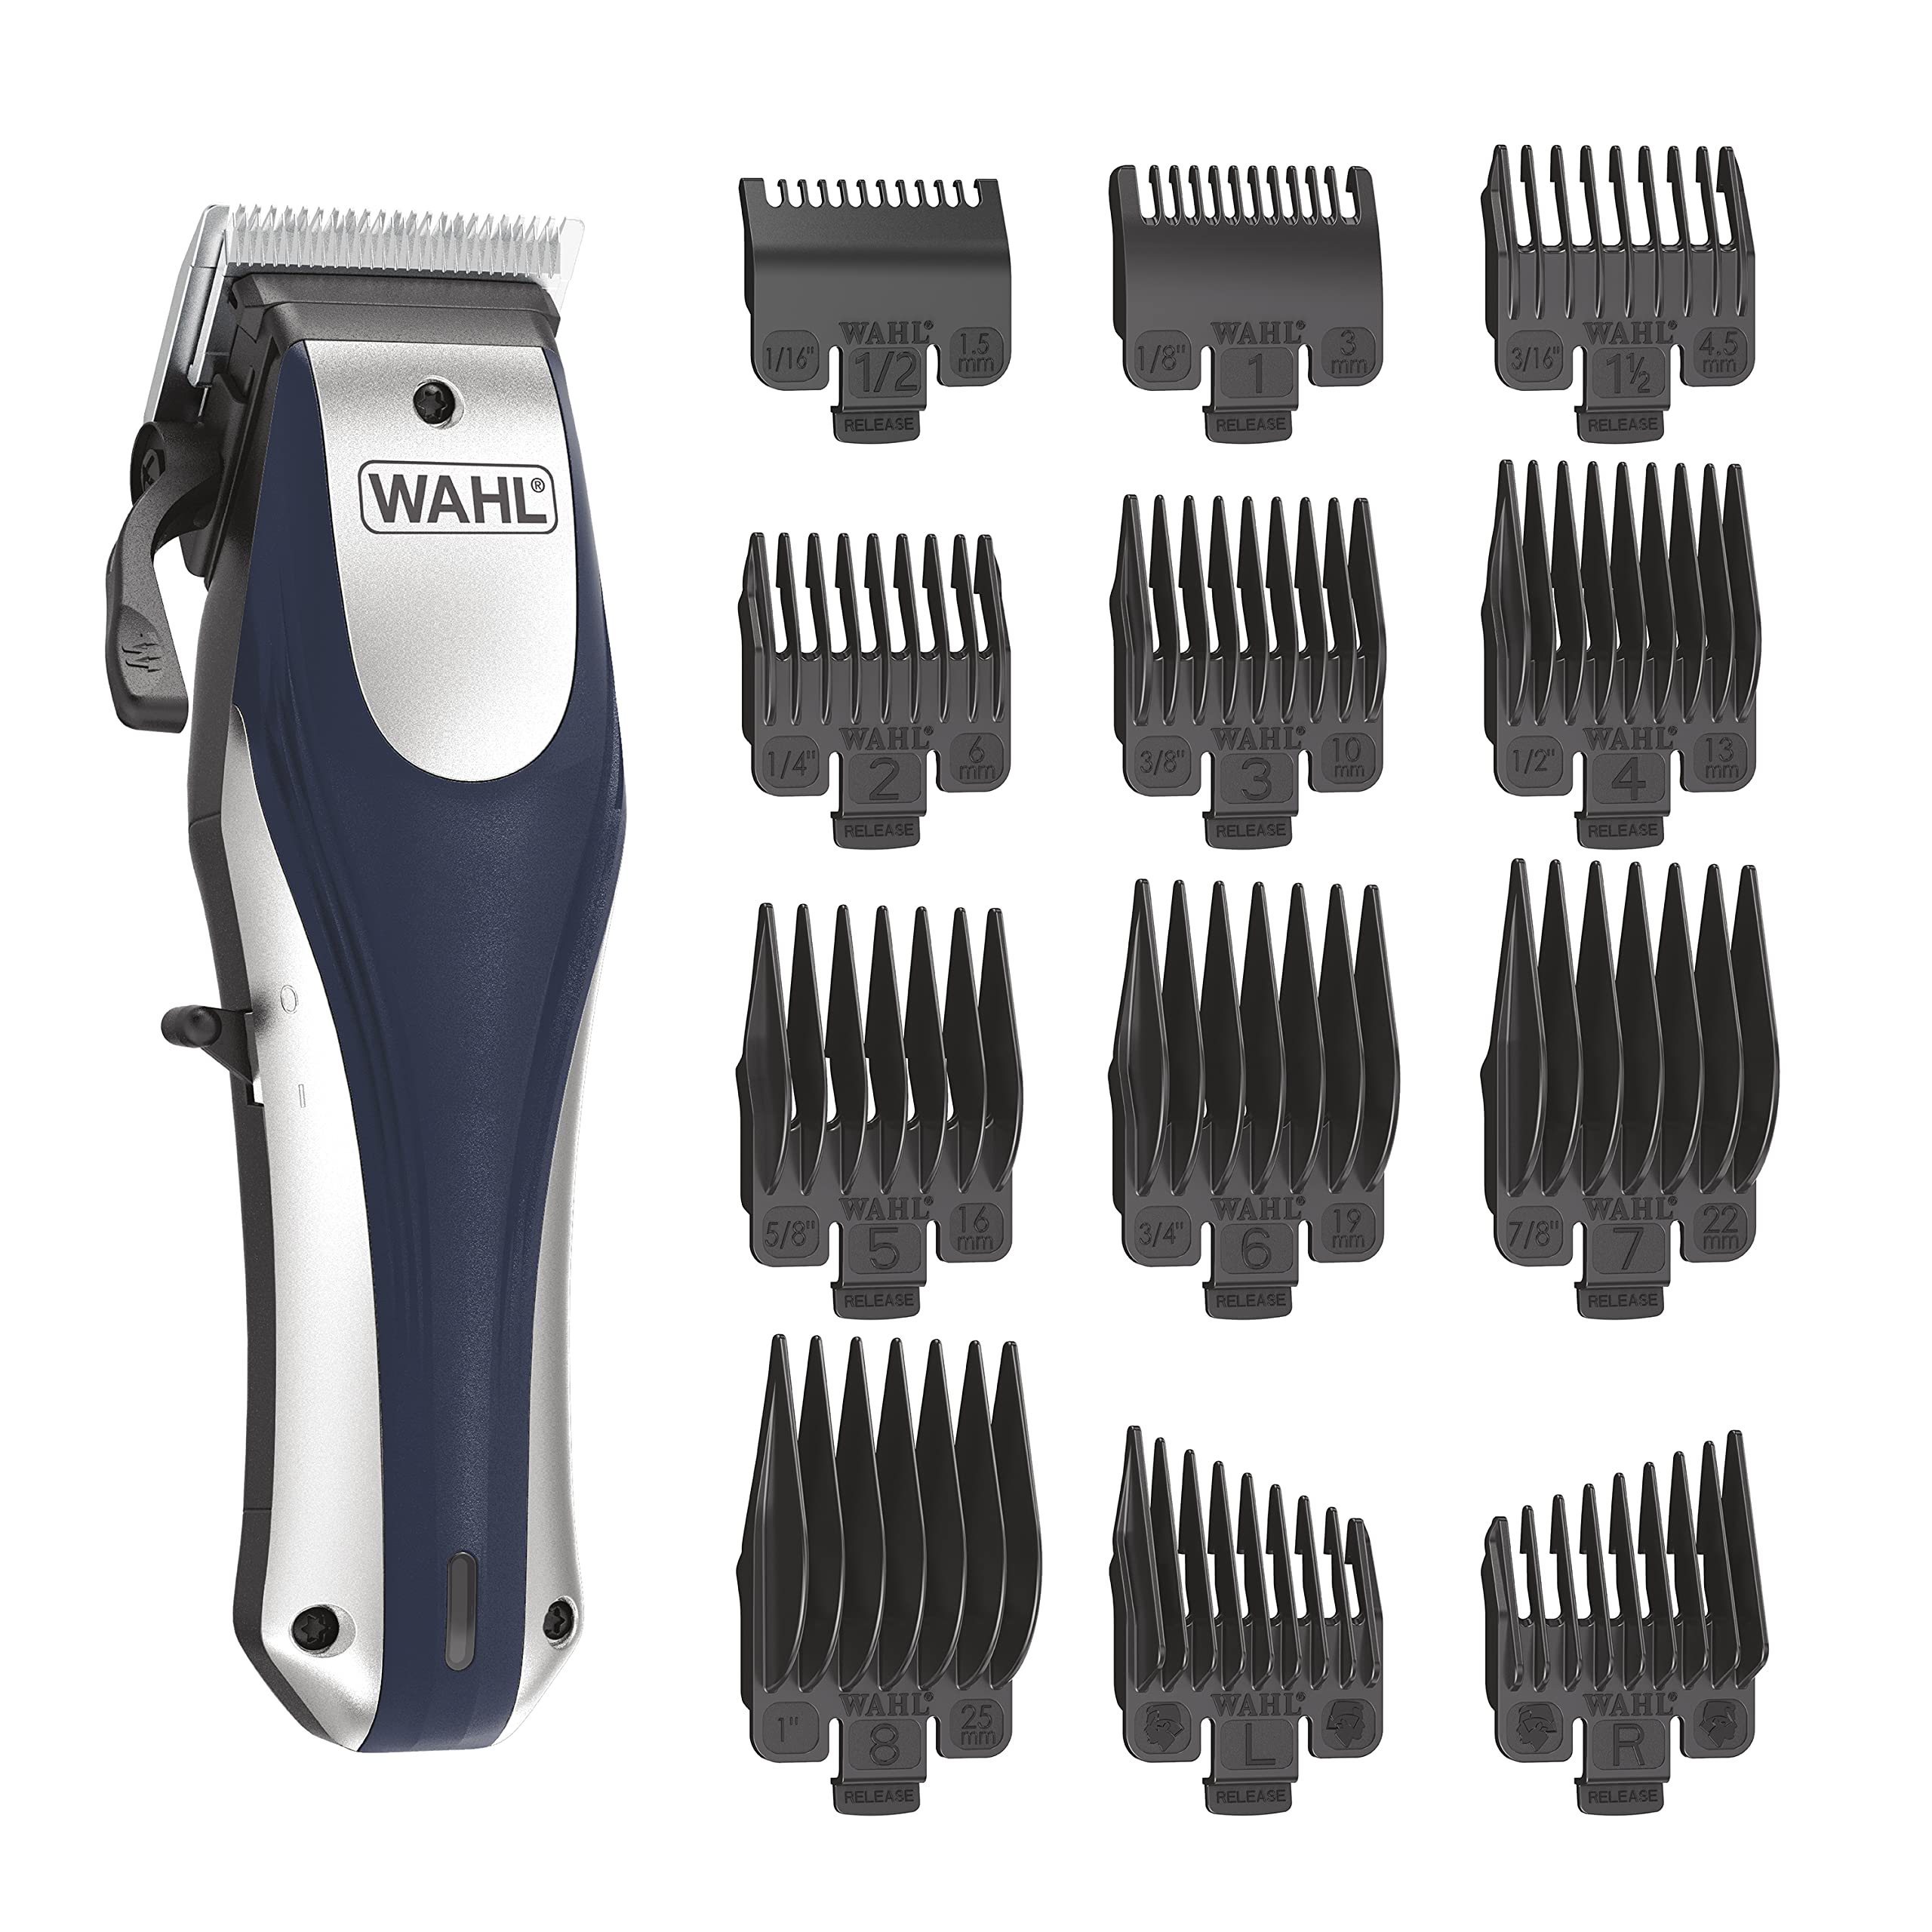 Wahl Lithium Ion Pro Rechargeable Cord/Cordless Hair Clippers